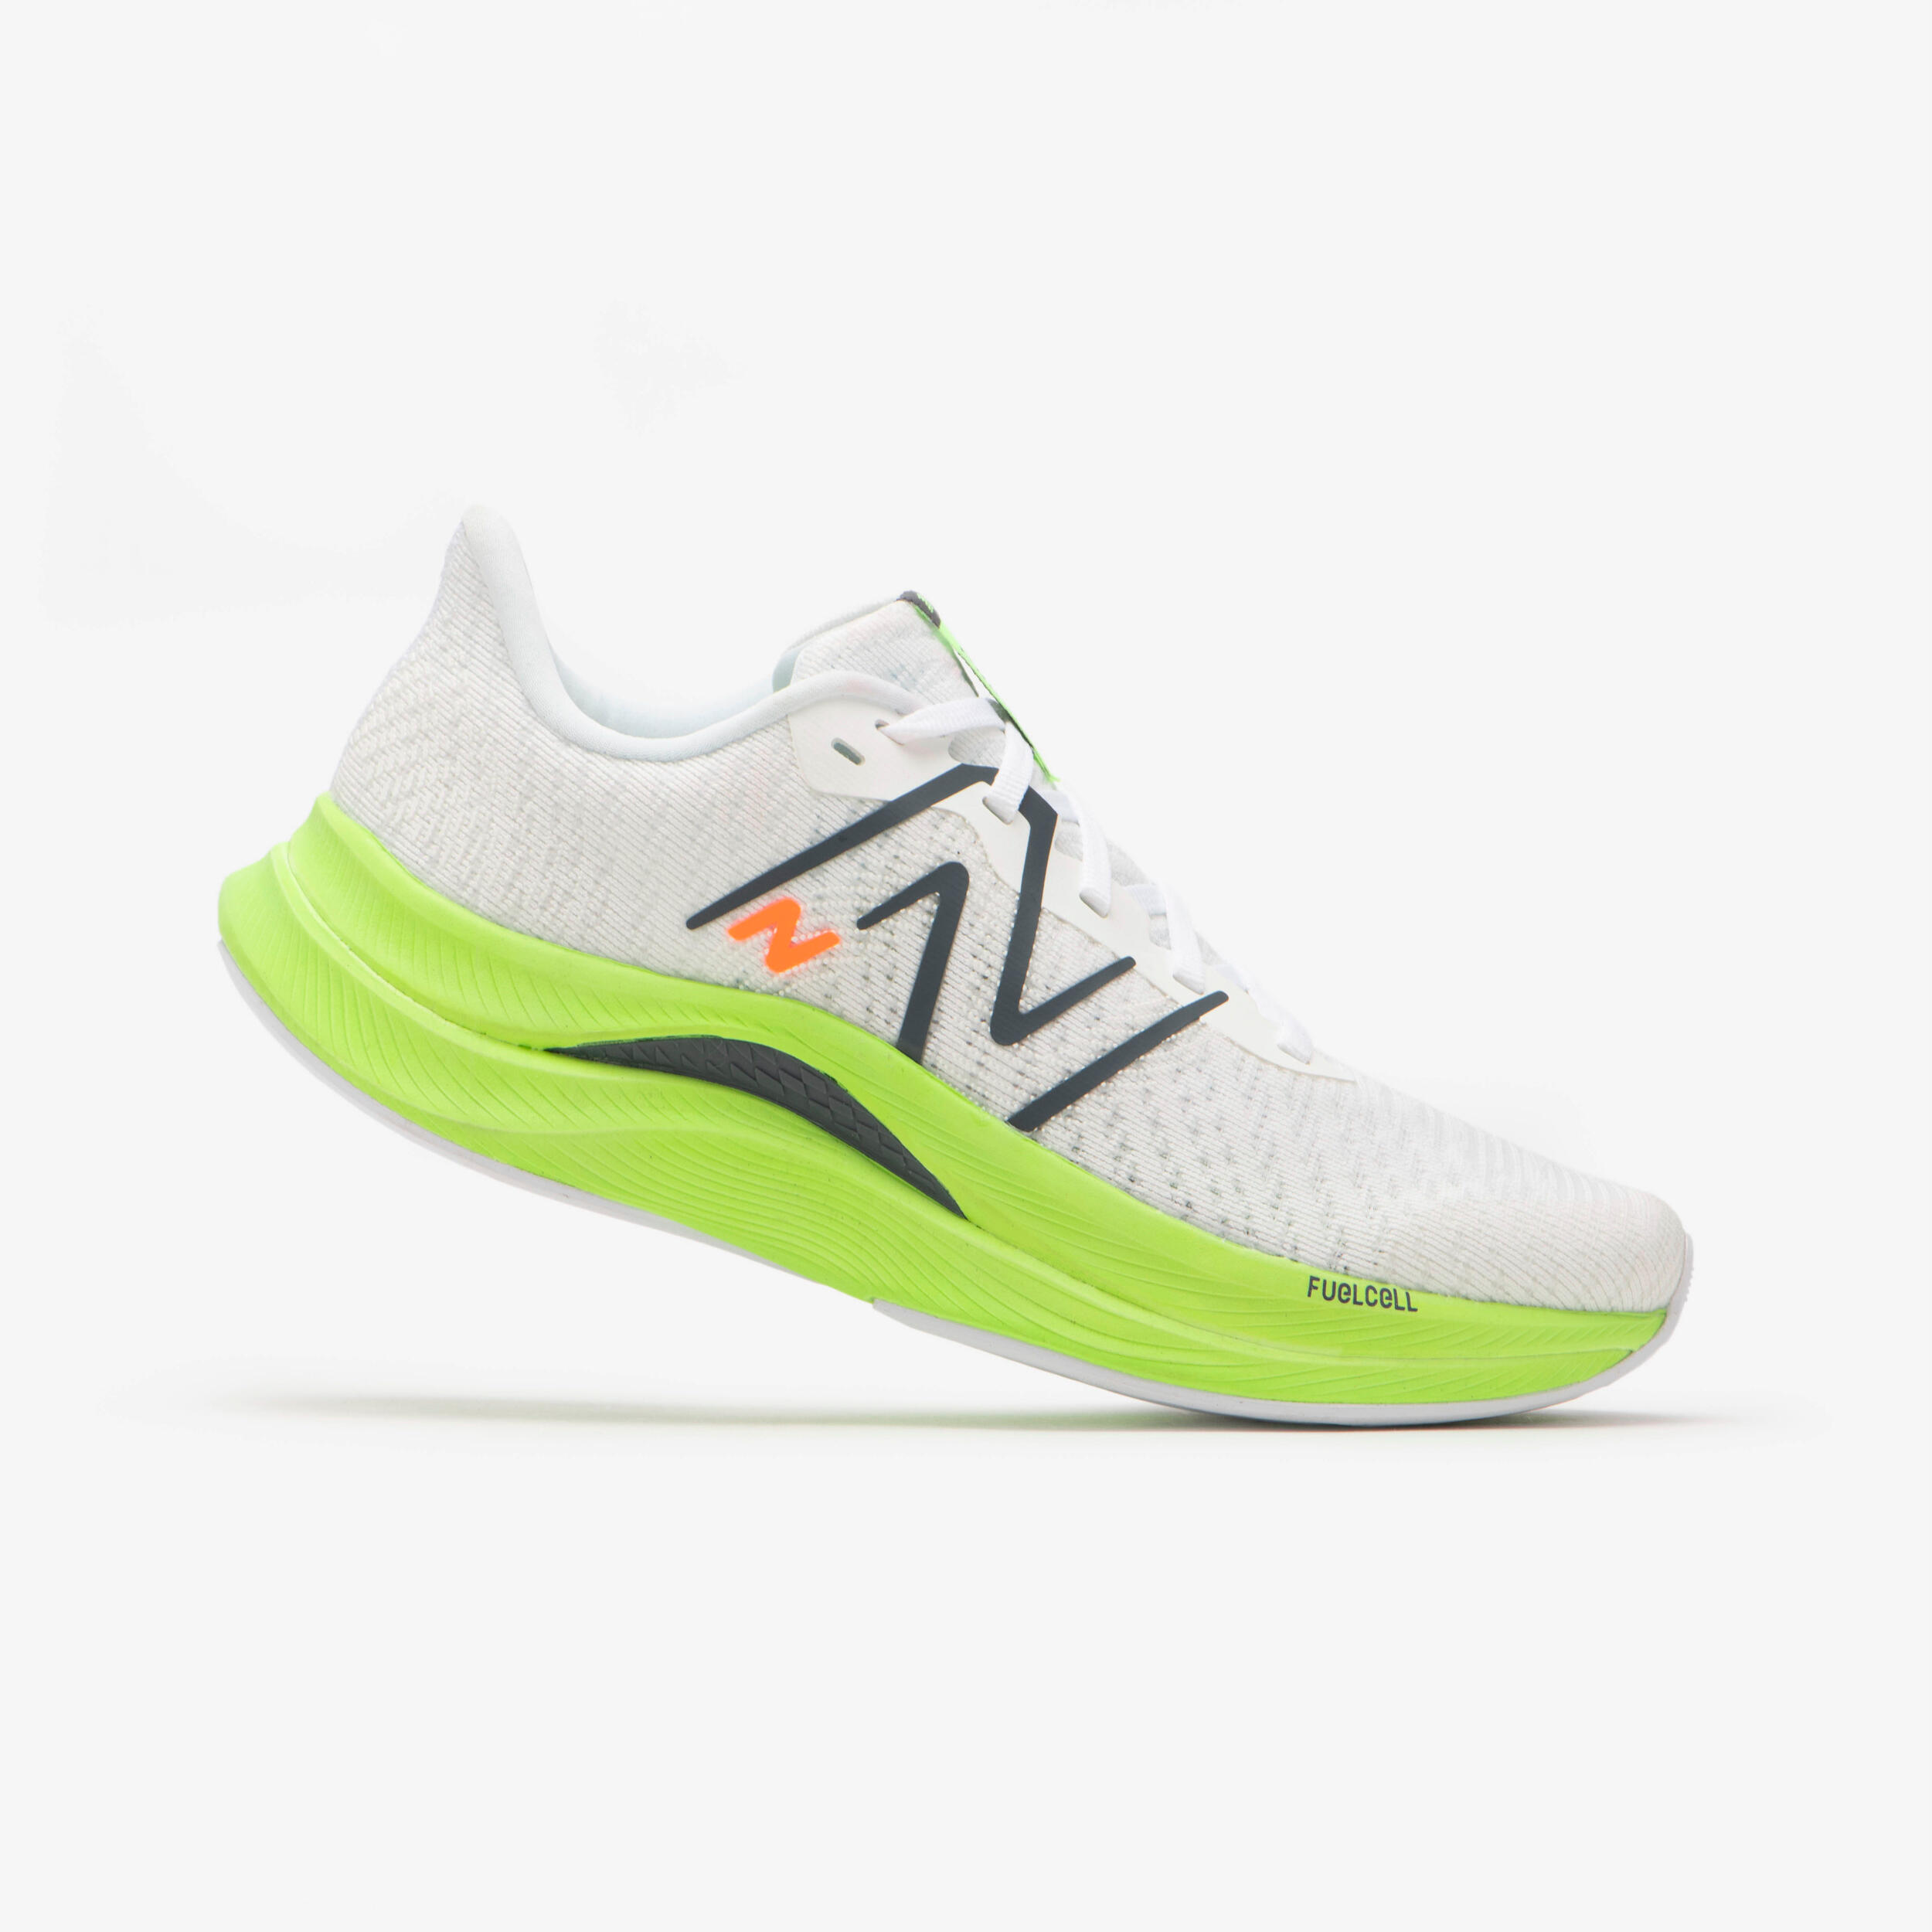 WOMEN'S NEW BALANCE FUELCELL PROPEL V4 RUNNING SHOES - WHITE AND NEON GREEN 1/7